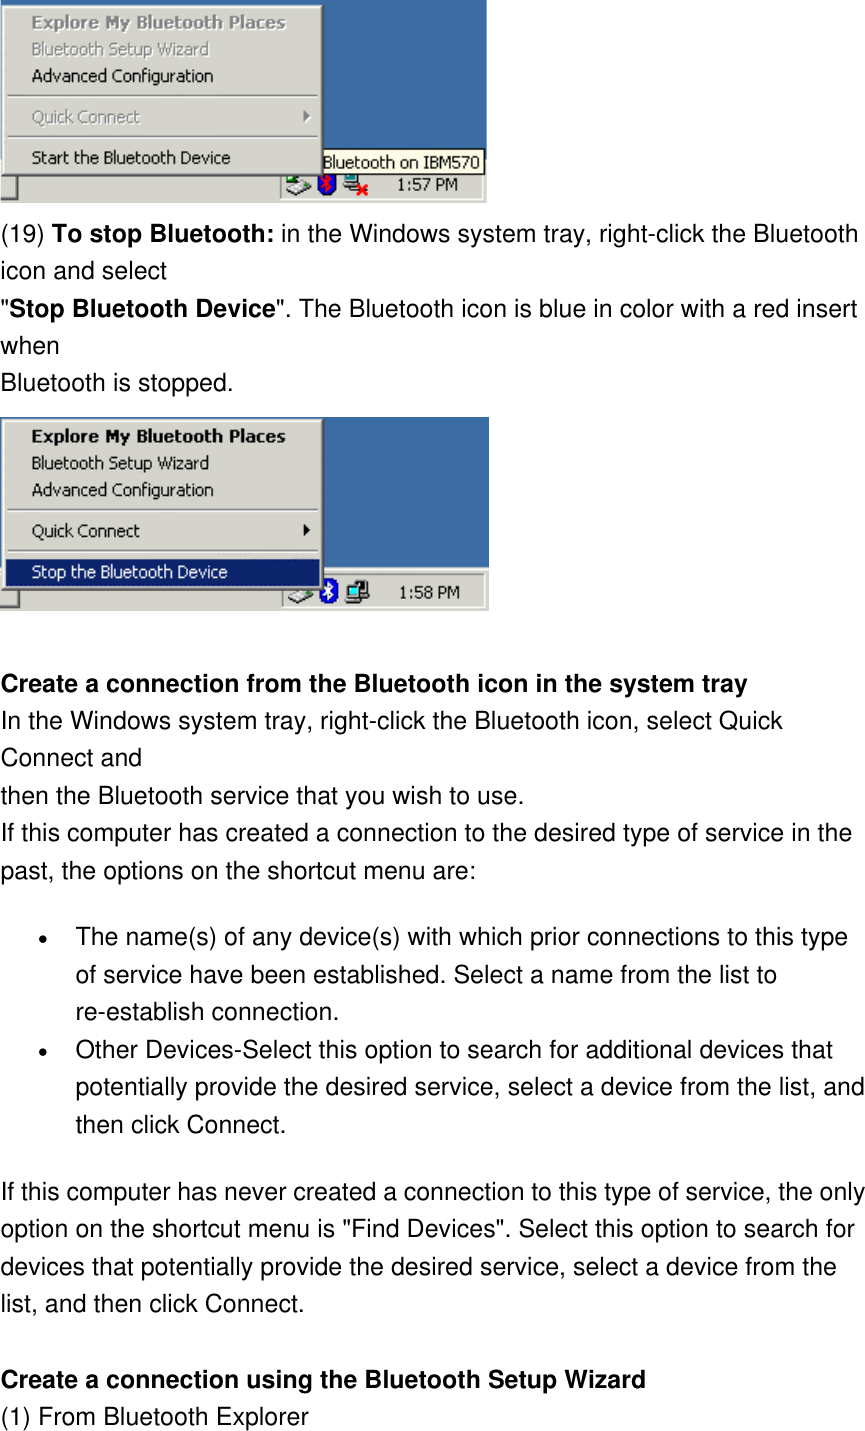  (19) To stop Bluetooth: in the Windows system tray, right-click the Bluetooth icon and select &quot;Stop Bluetooth Device&quot;. The Bluetooth icon is blue in color with a red insert when Bluetooth is stopped.    Create a connection from the Bluetooth icon in the system tray In the Windows system tray, right-click the Bluetooth icon, select Quick Connect and then the Bluetooth service that you wish to use. If this computer has created a connection to the desired type of service in the past, the options on the shortcut menu are: •  The name(s) of any device(s) with which prior connections to this type of service have been established. Select a name from the list to re-establish connection. •  Other Devices-Select this option to search for additional devices that potentially provide the desired service, select a device from the list, and then click Connect. If this computer has never created a connection to this type of service, the only option on the shortcut menu is &quot;Find Devices&quot;. Select this option to search for devices that potentially provide the desired service, select a device from the list, and then click Connect.   Create a connection using the Bluetooth Setup Wizard (1) From Bluetooth Explorer 